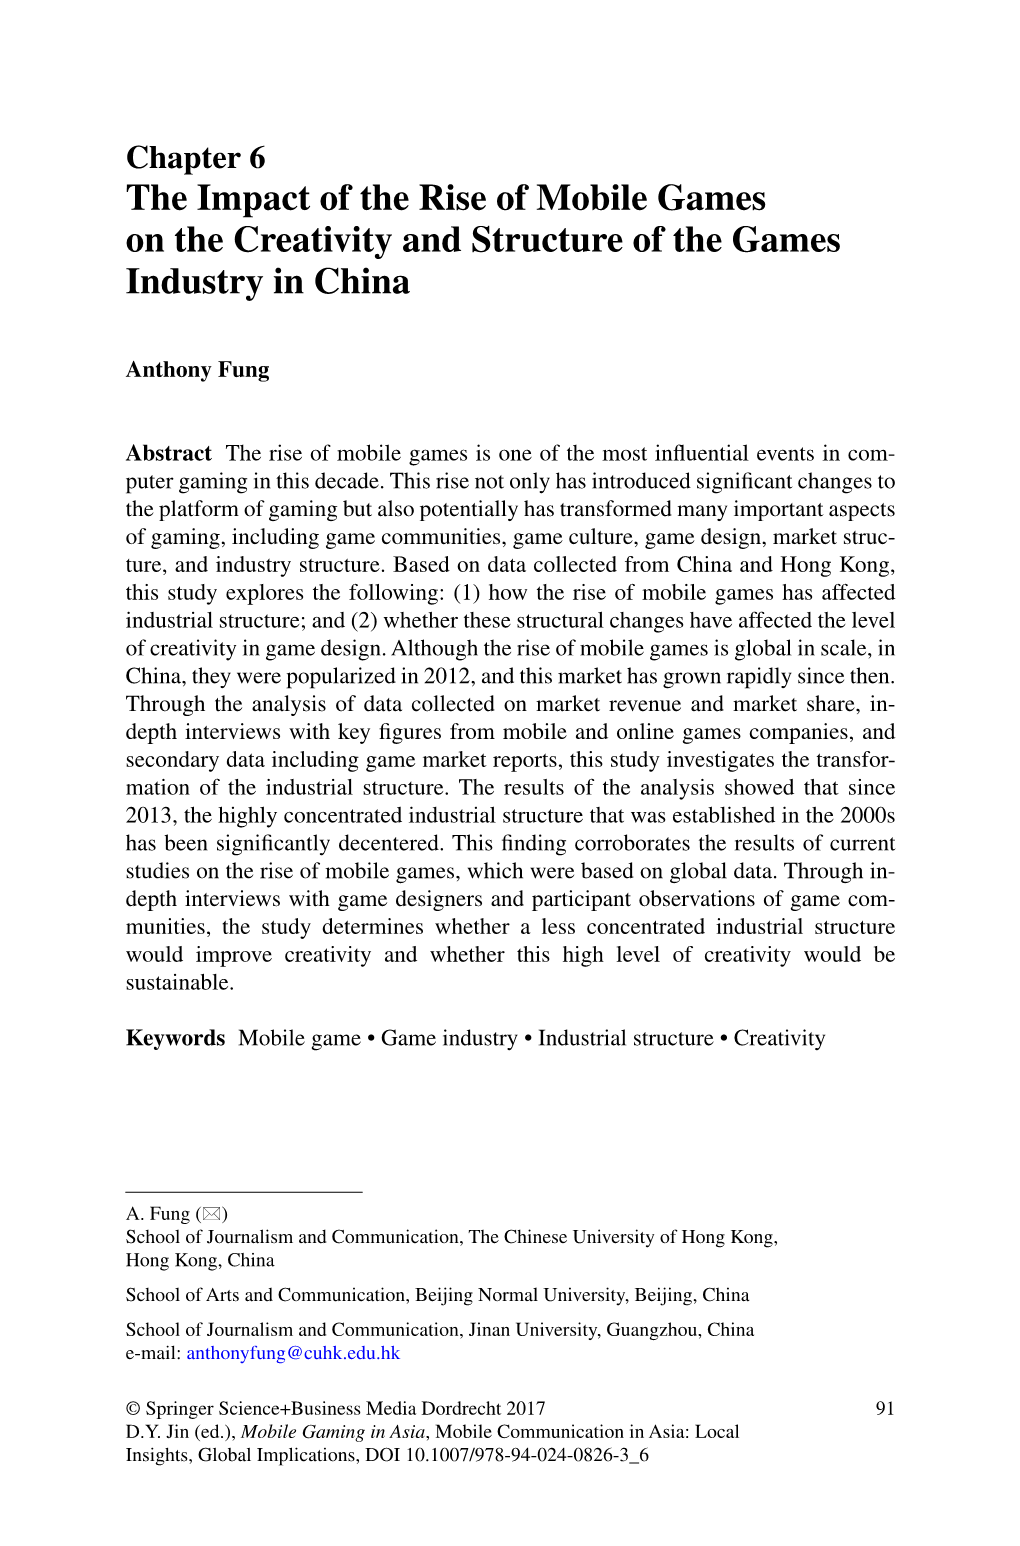 The Impact of the Rise of Mobile Games on the Creativity and Structure of the Games Industry in China